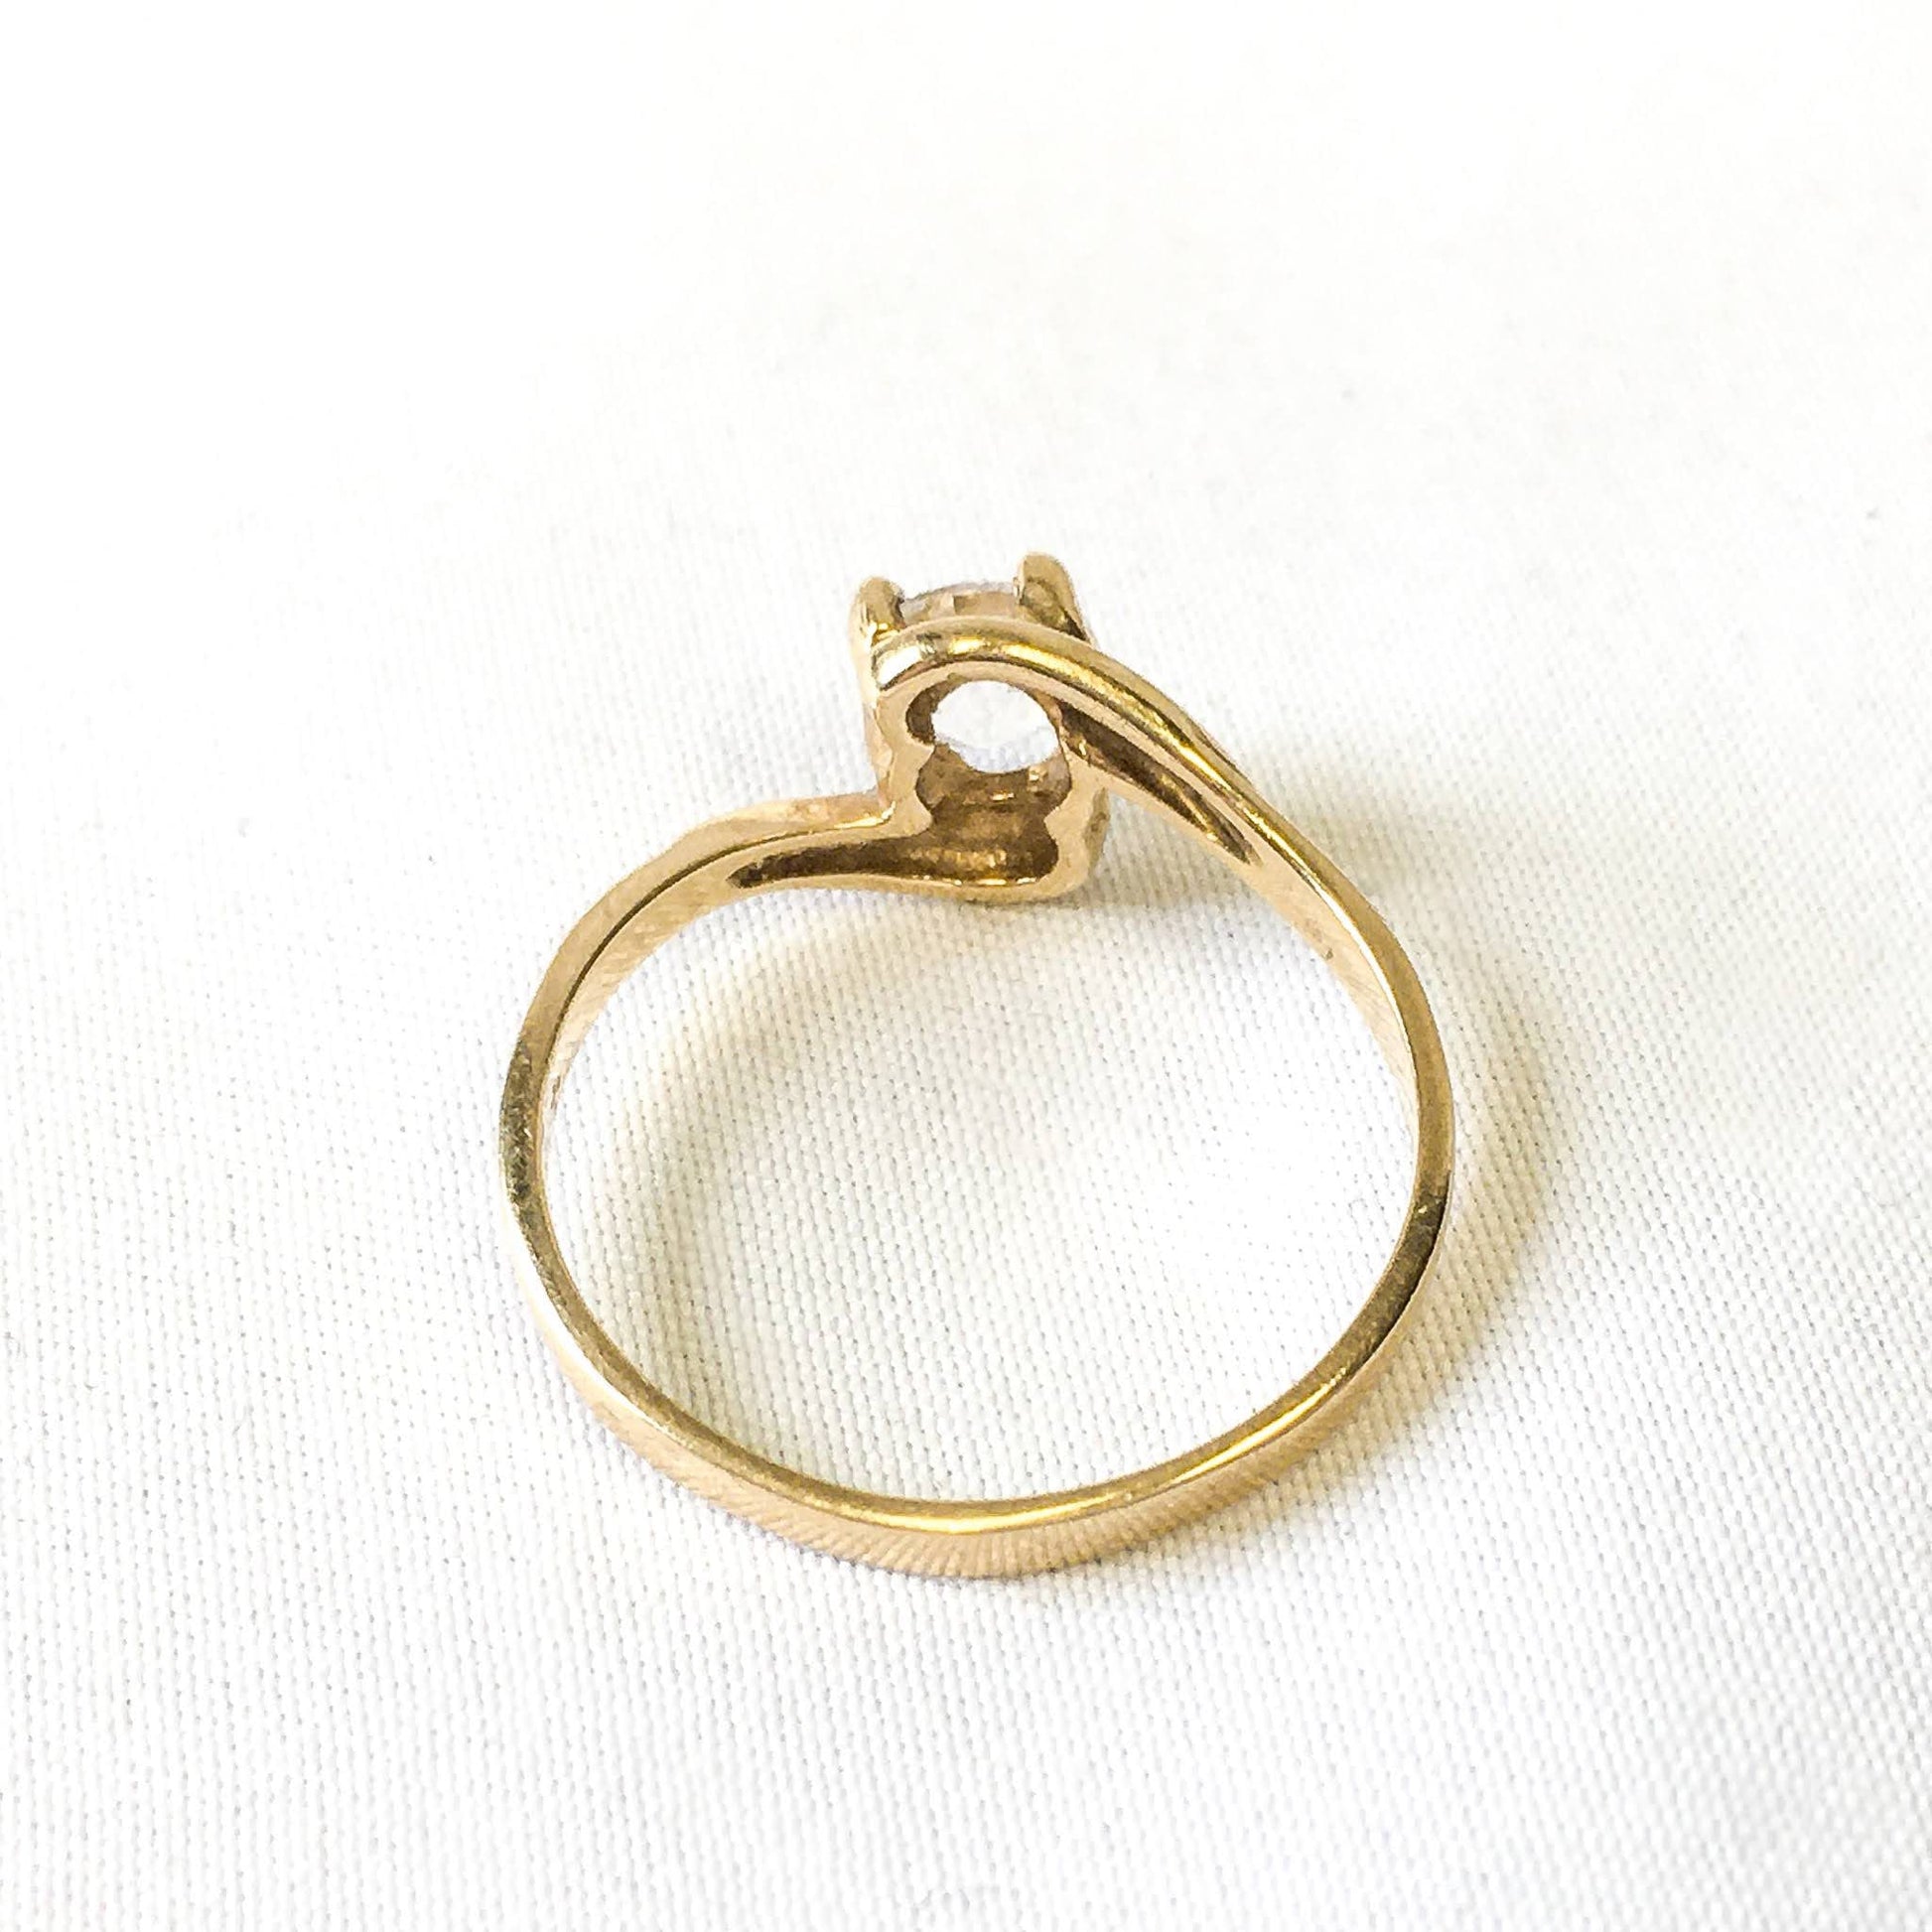 Vintage 10k DC Quartz Solitaire Wedding or Engagement Ring, Beautiful Gold Ring, Size 6.75